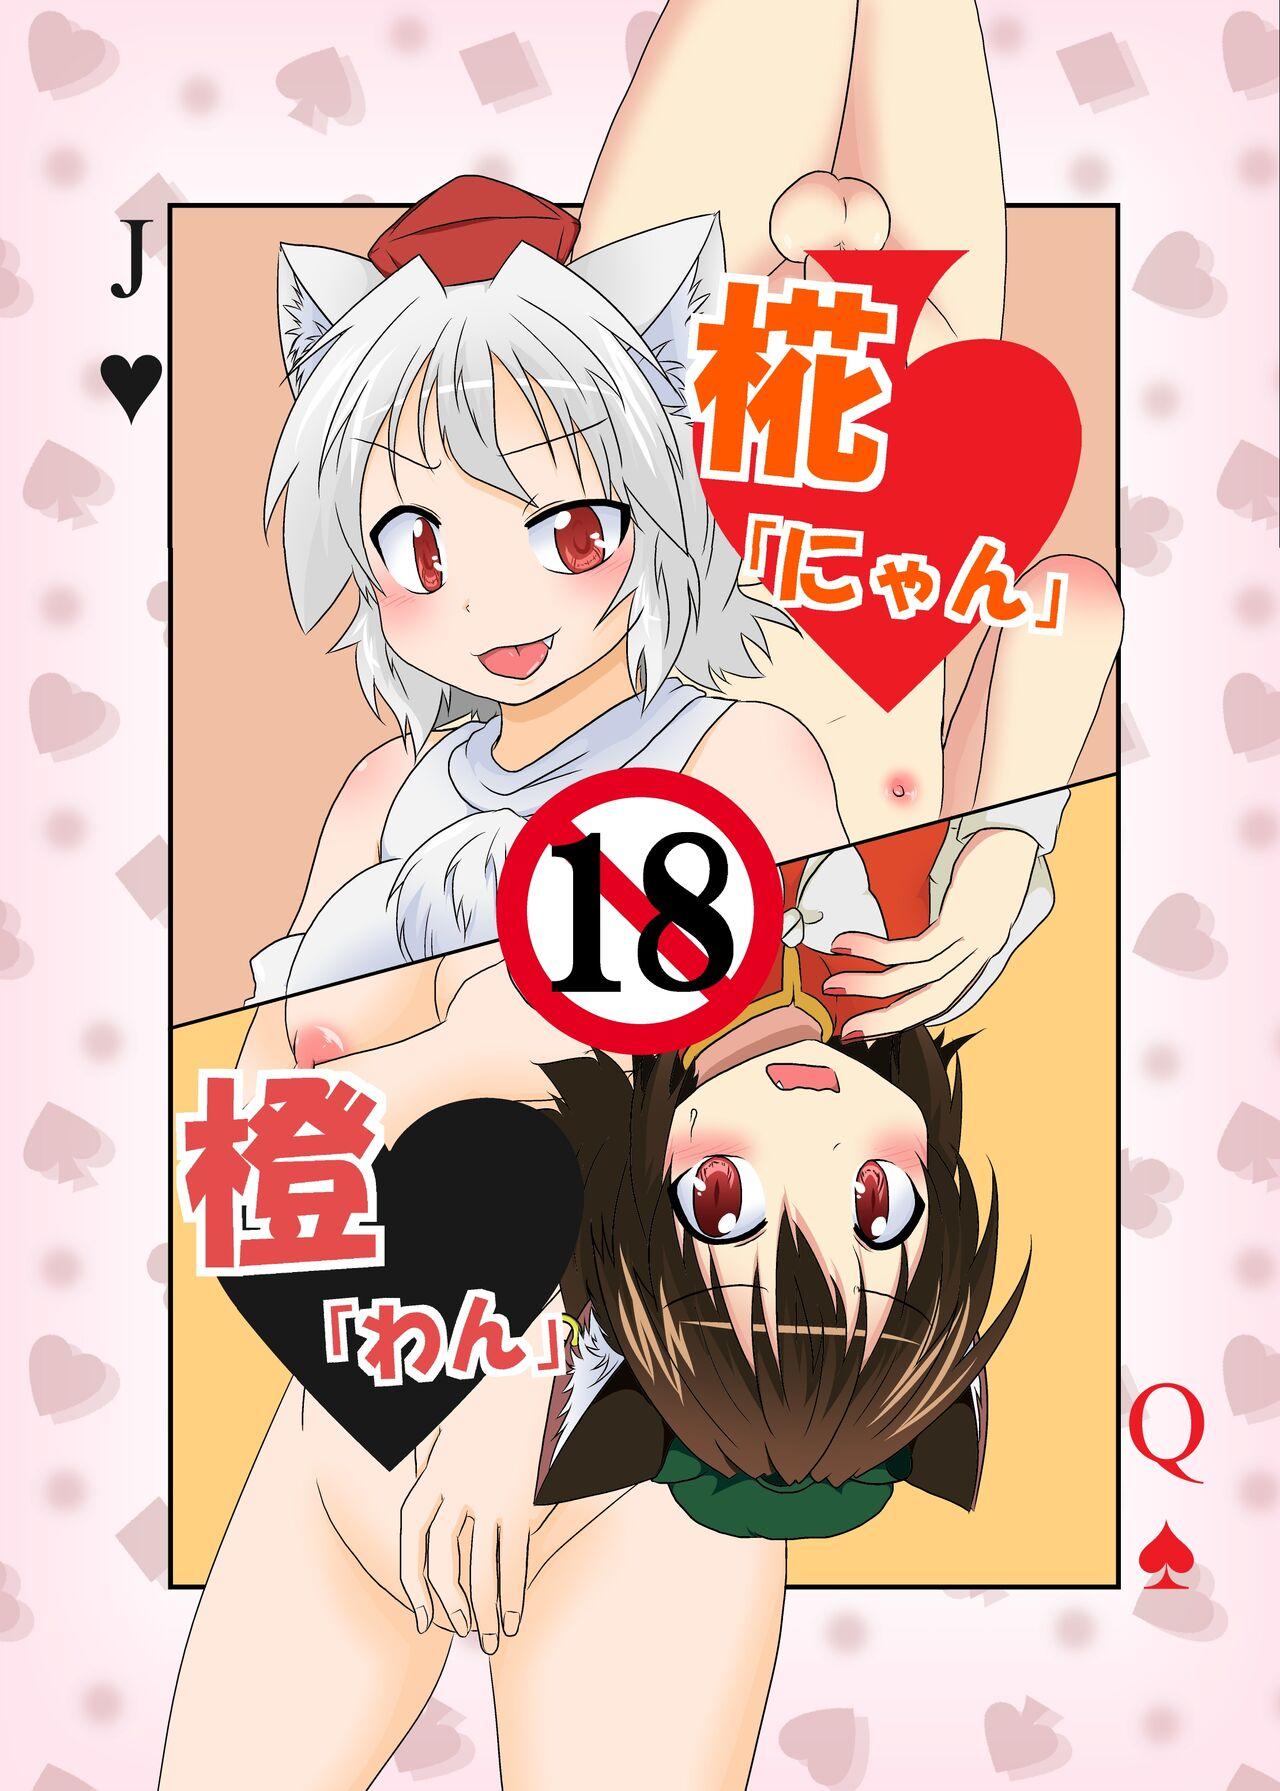 Spa Momiji "Nyan" Chen "Wan" - Touhou project 18 Year Old - Picture 1